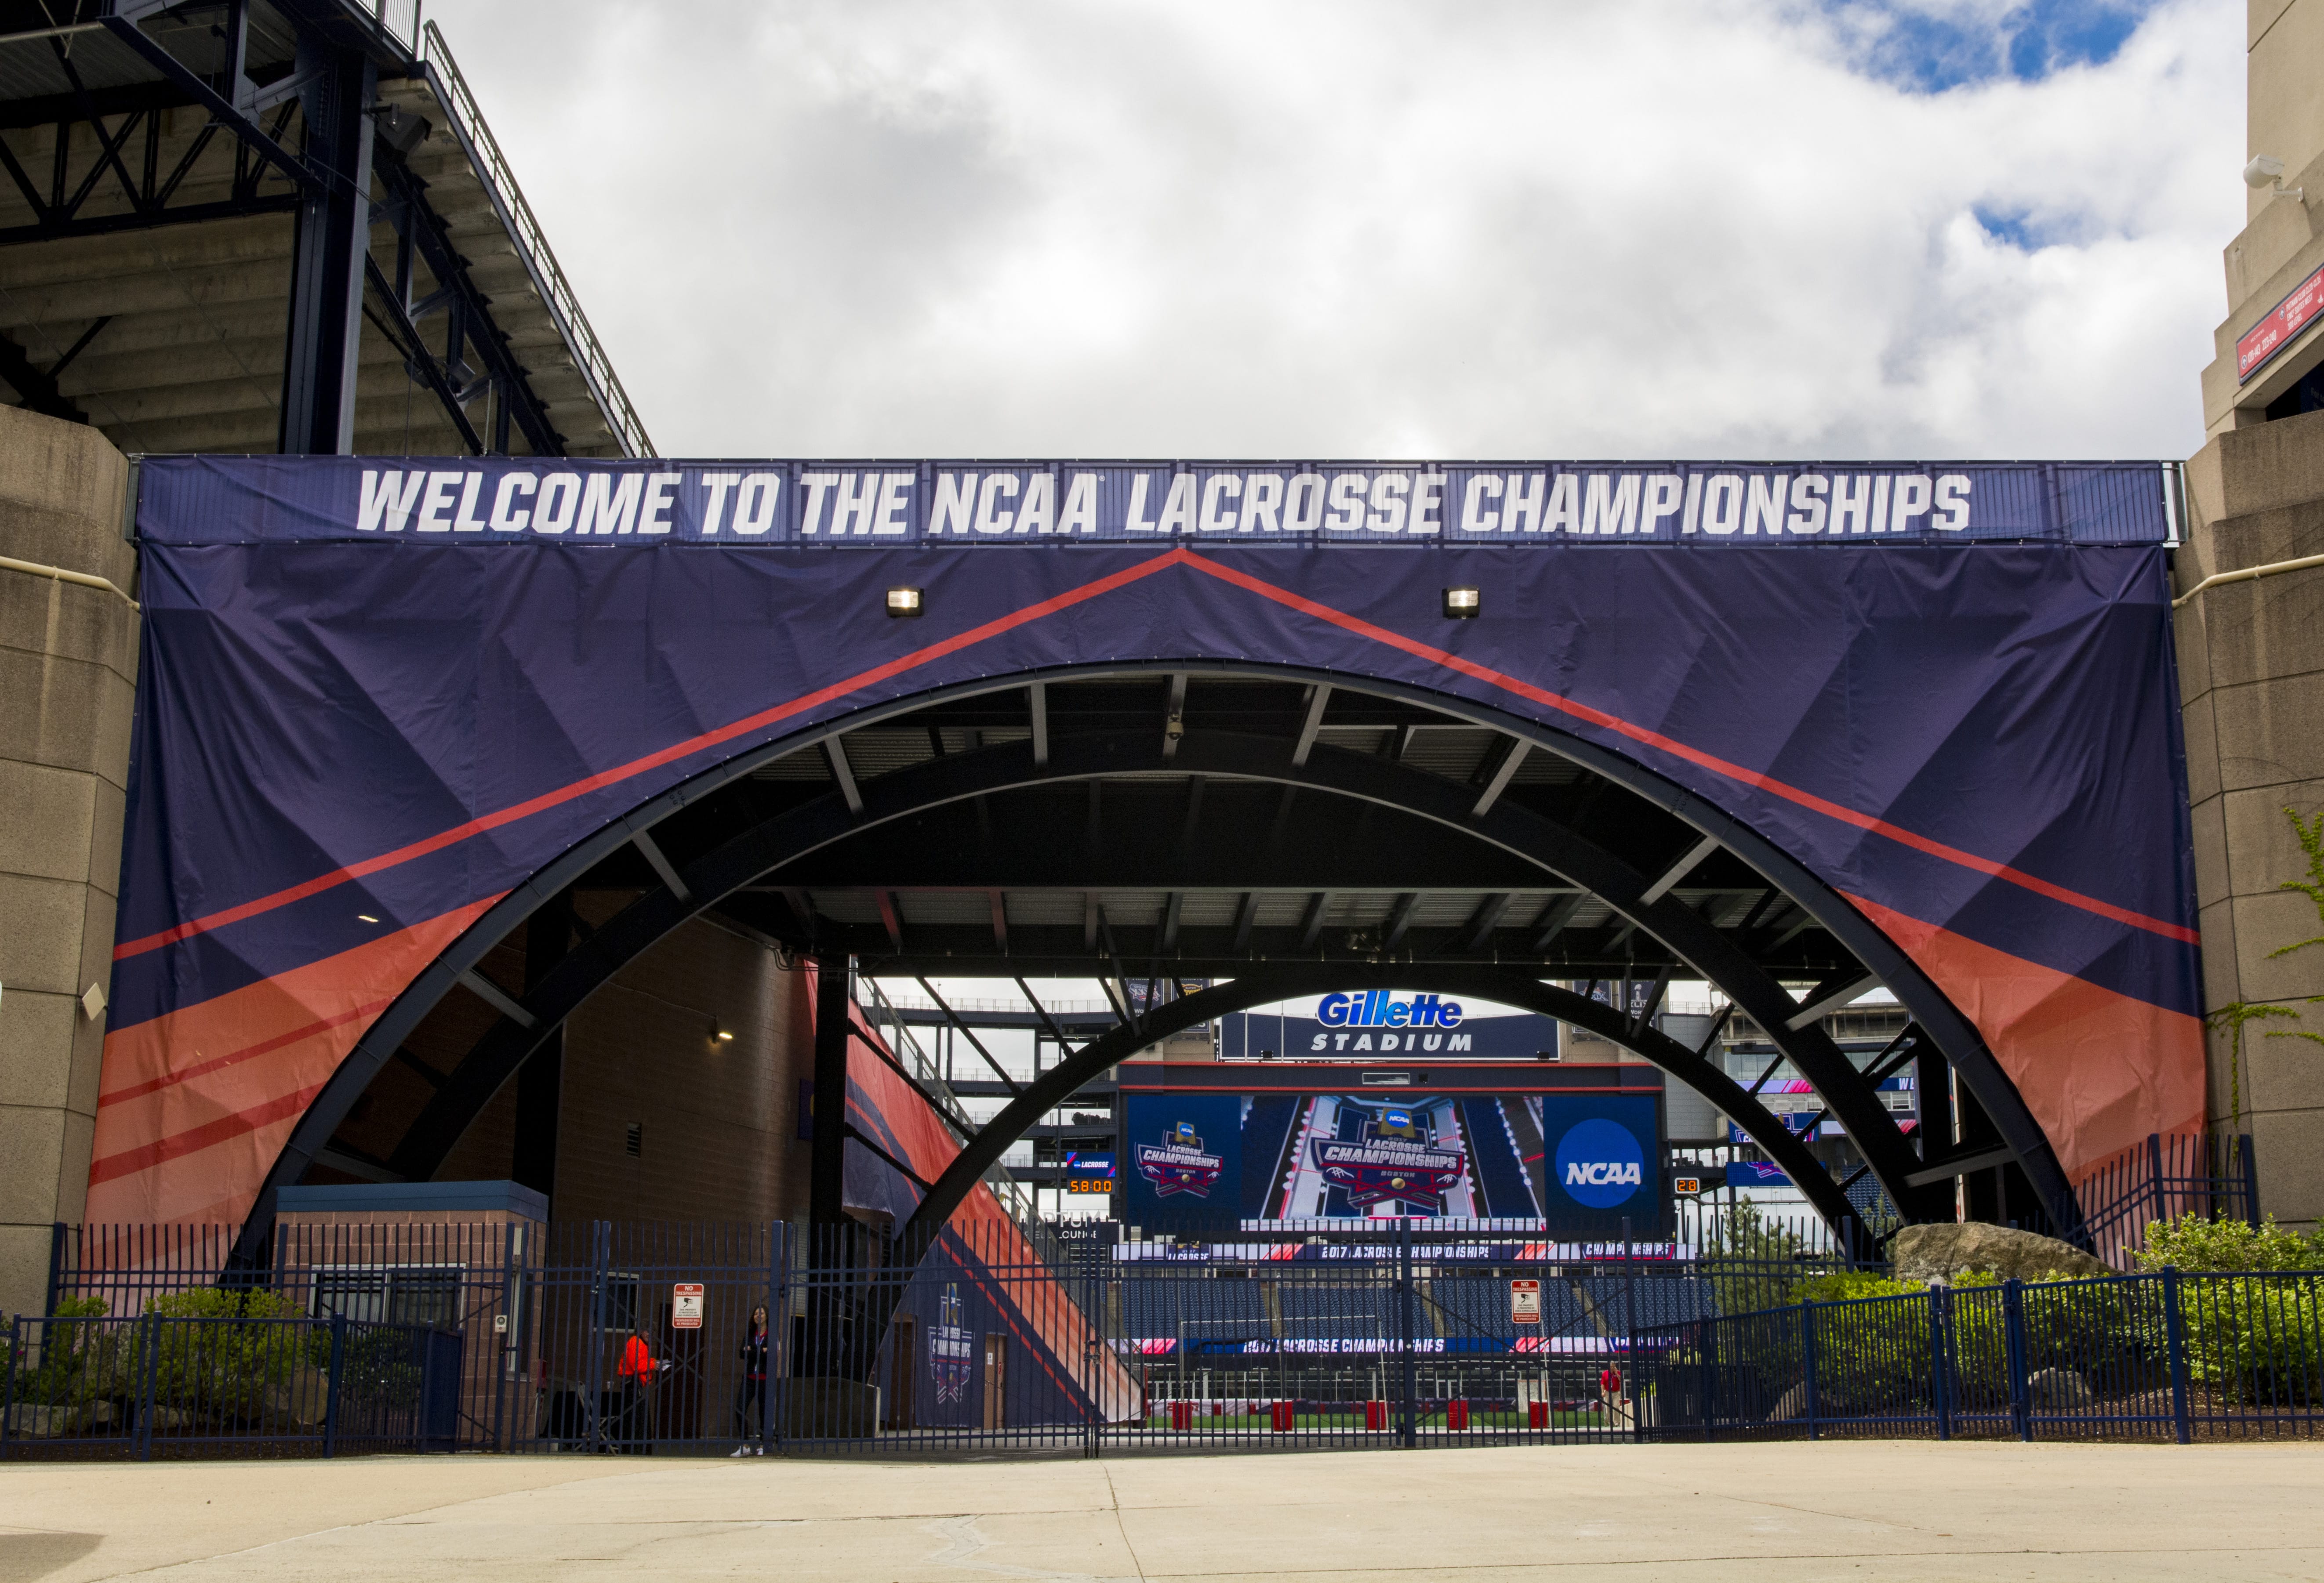 NCAA Lacrosse Welcome Arch Mesh Banners